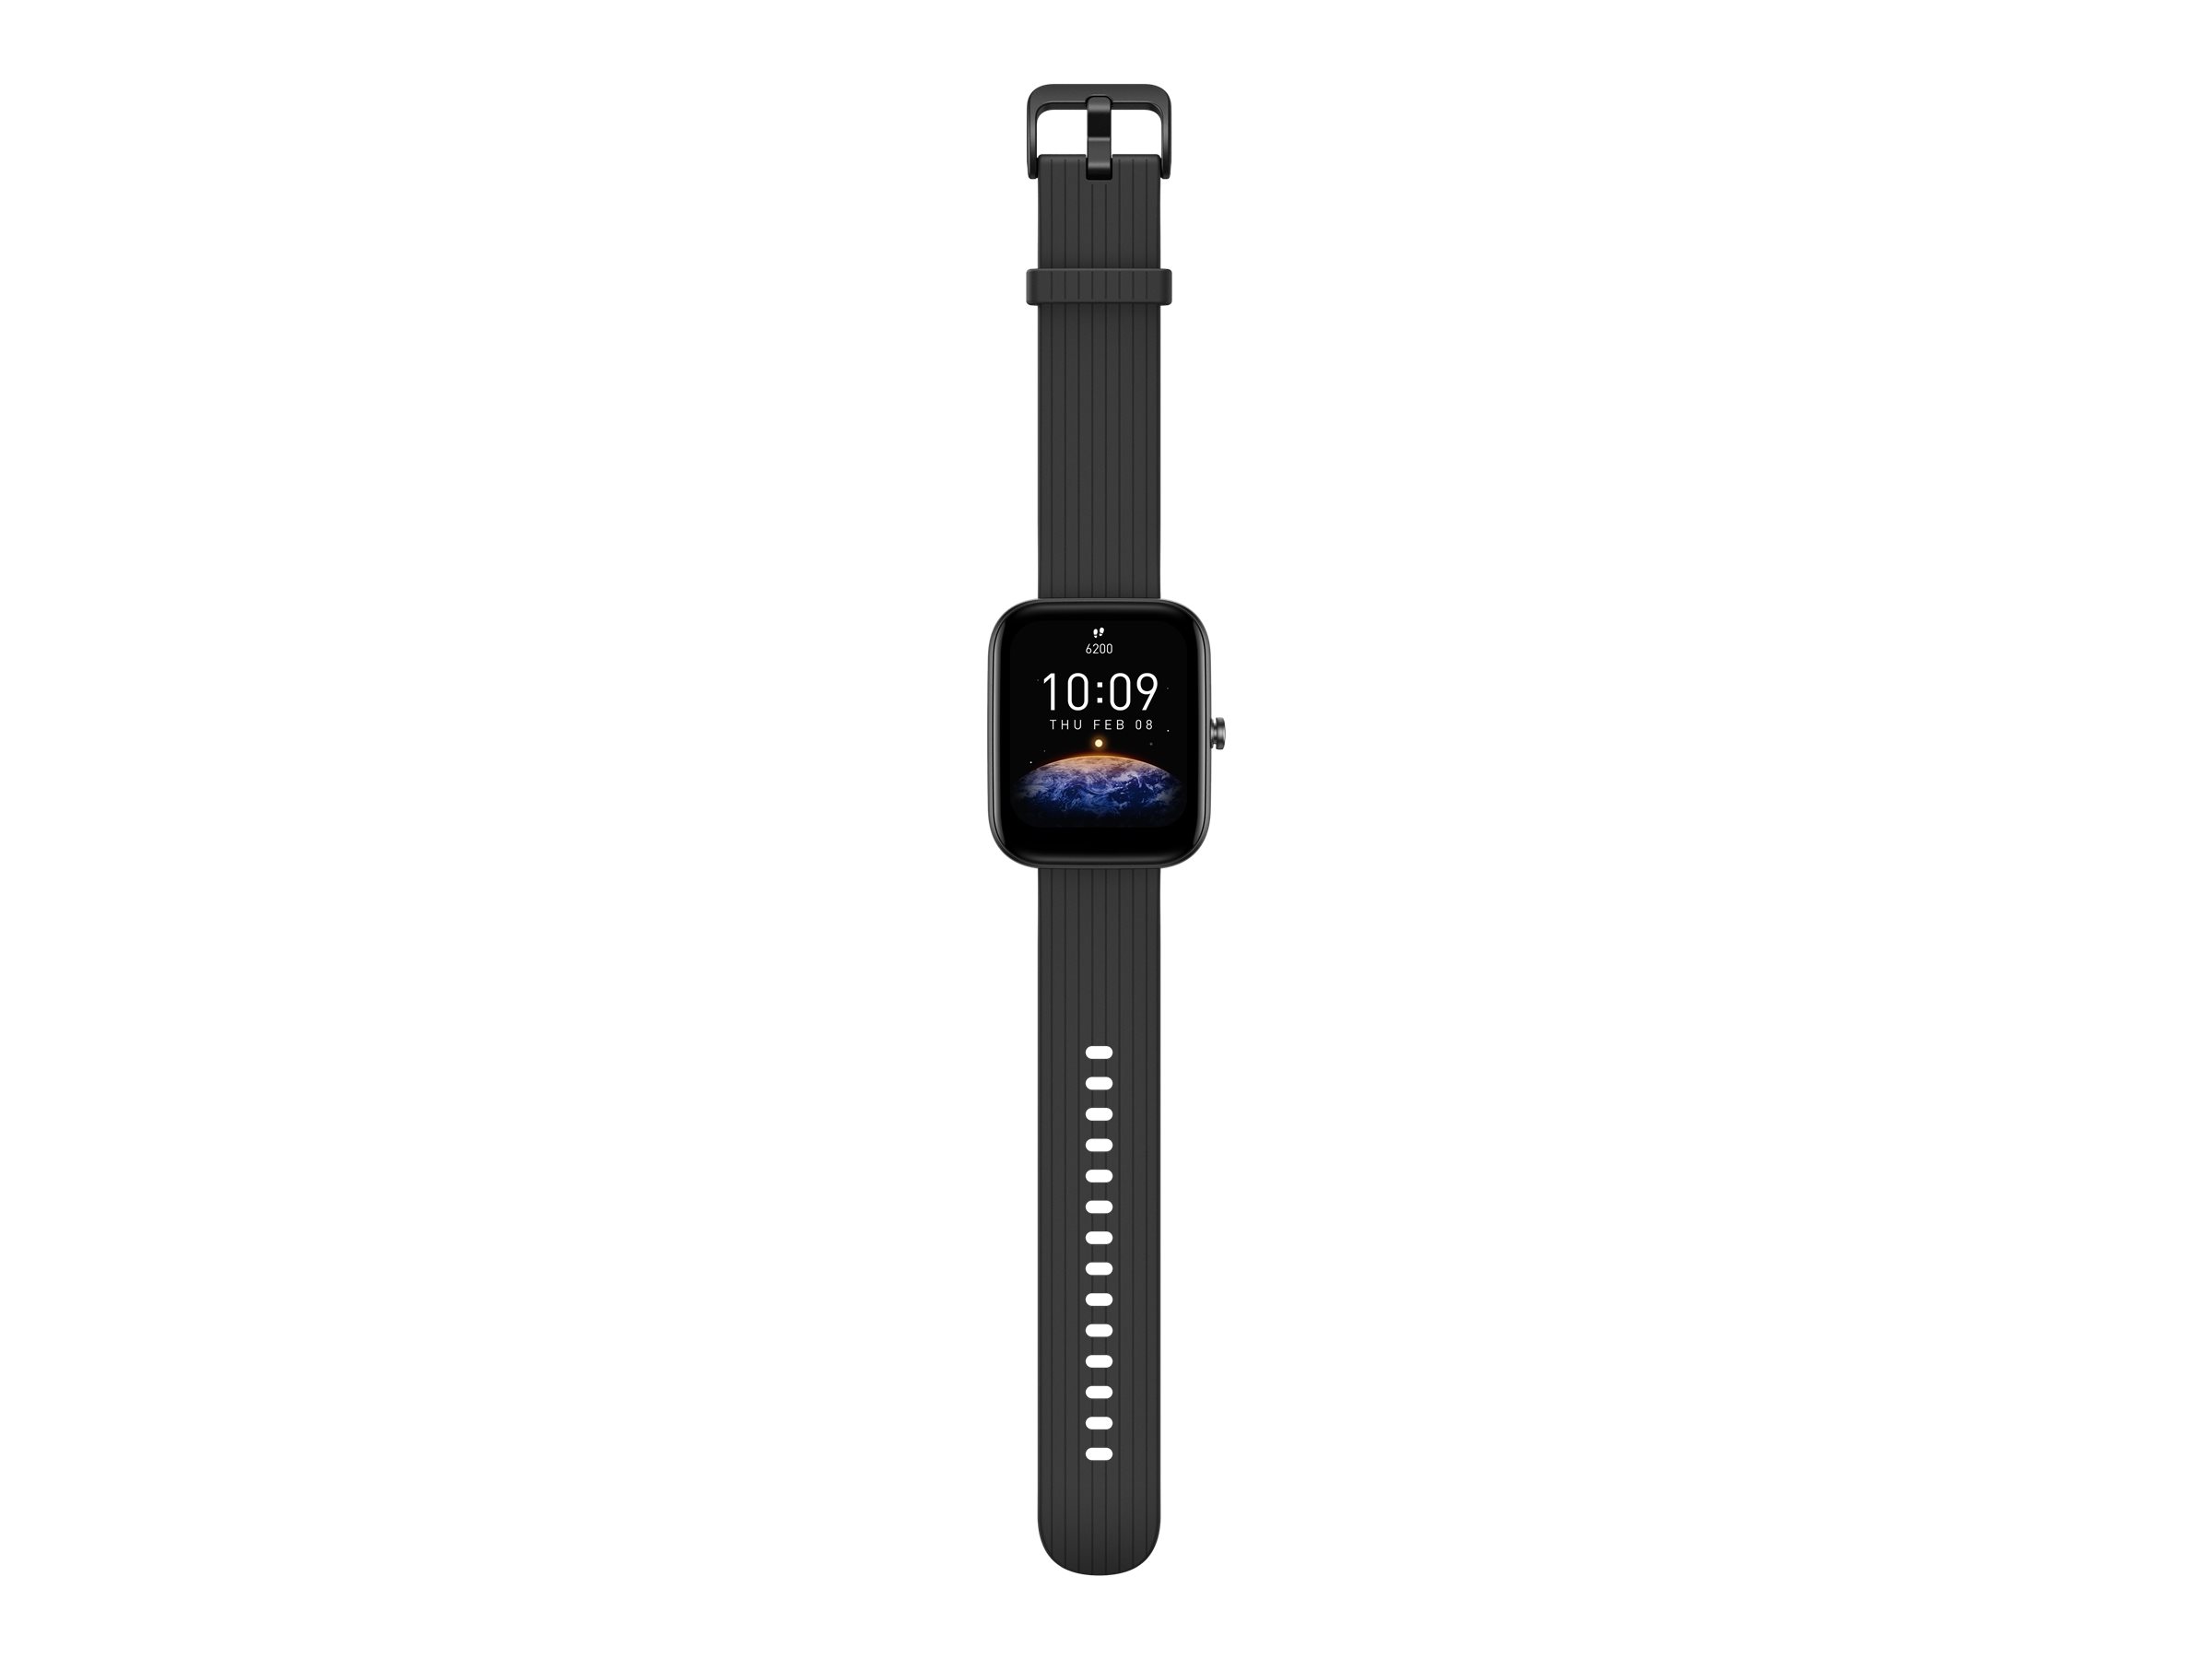 Apple Watch SE (2nd generation) - Technical Specifications